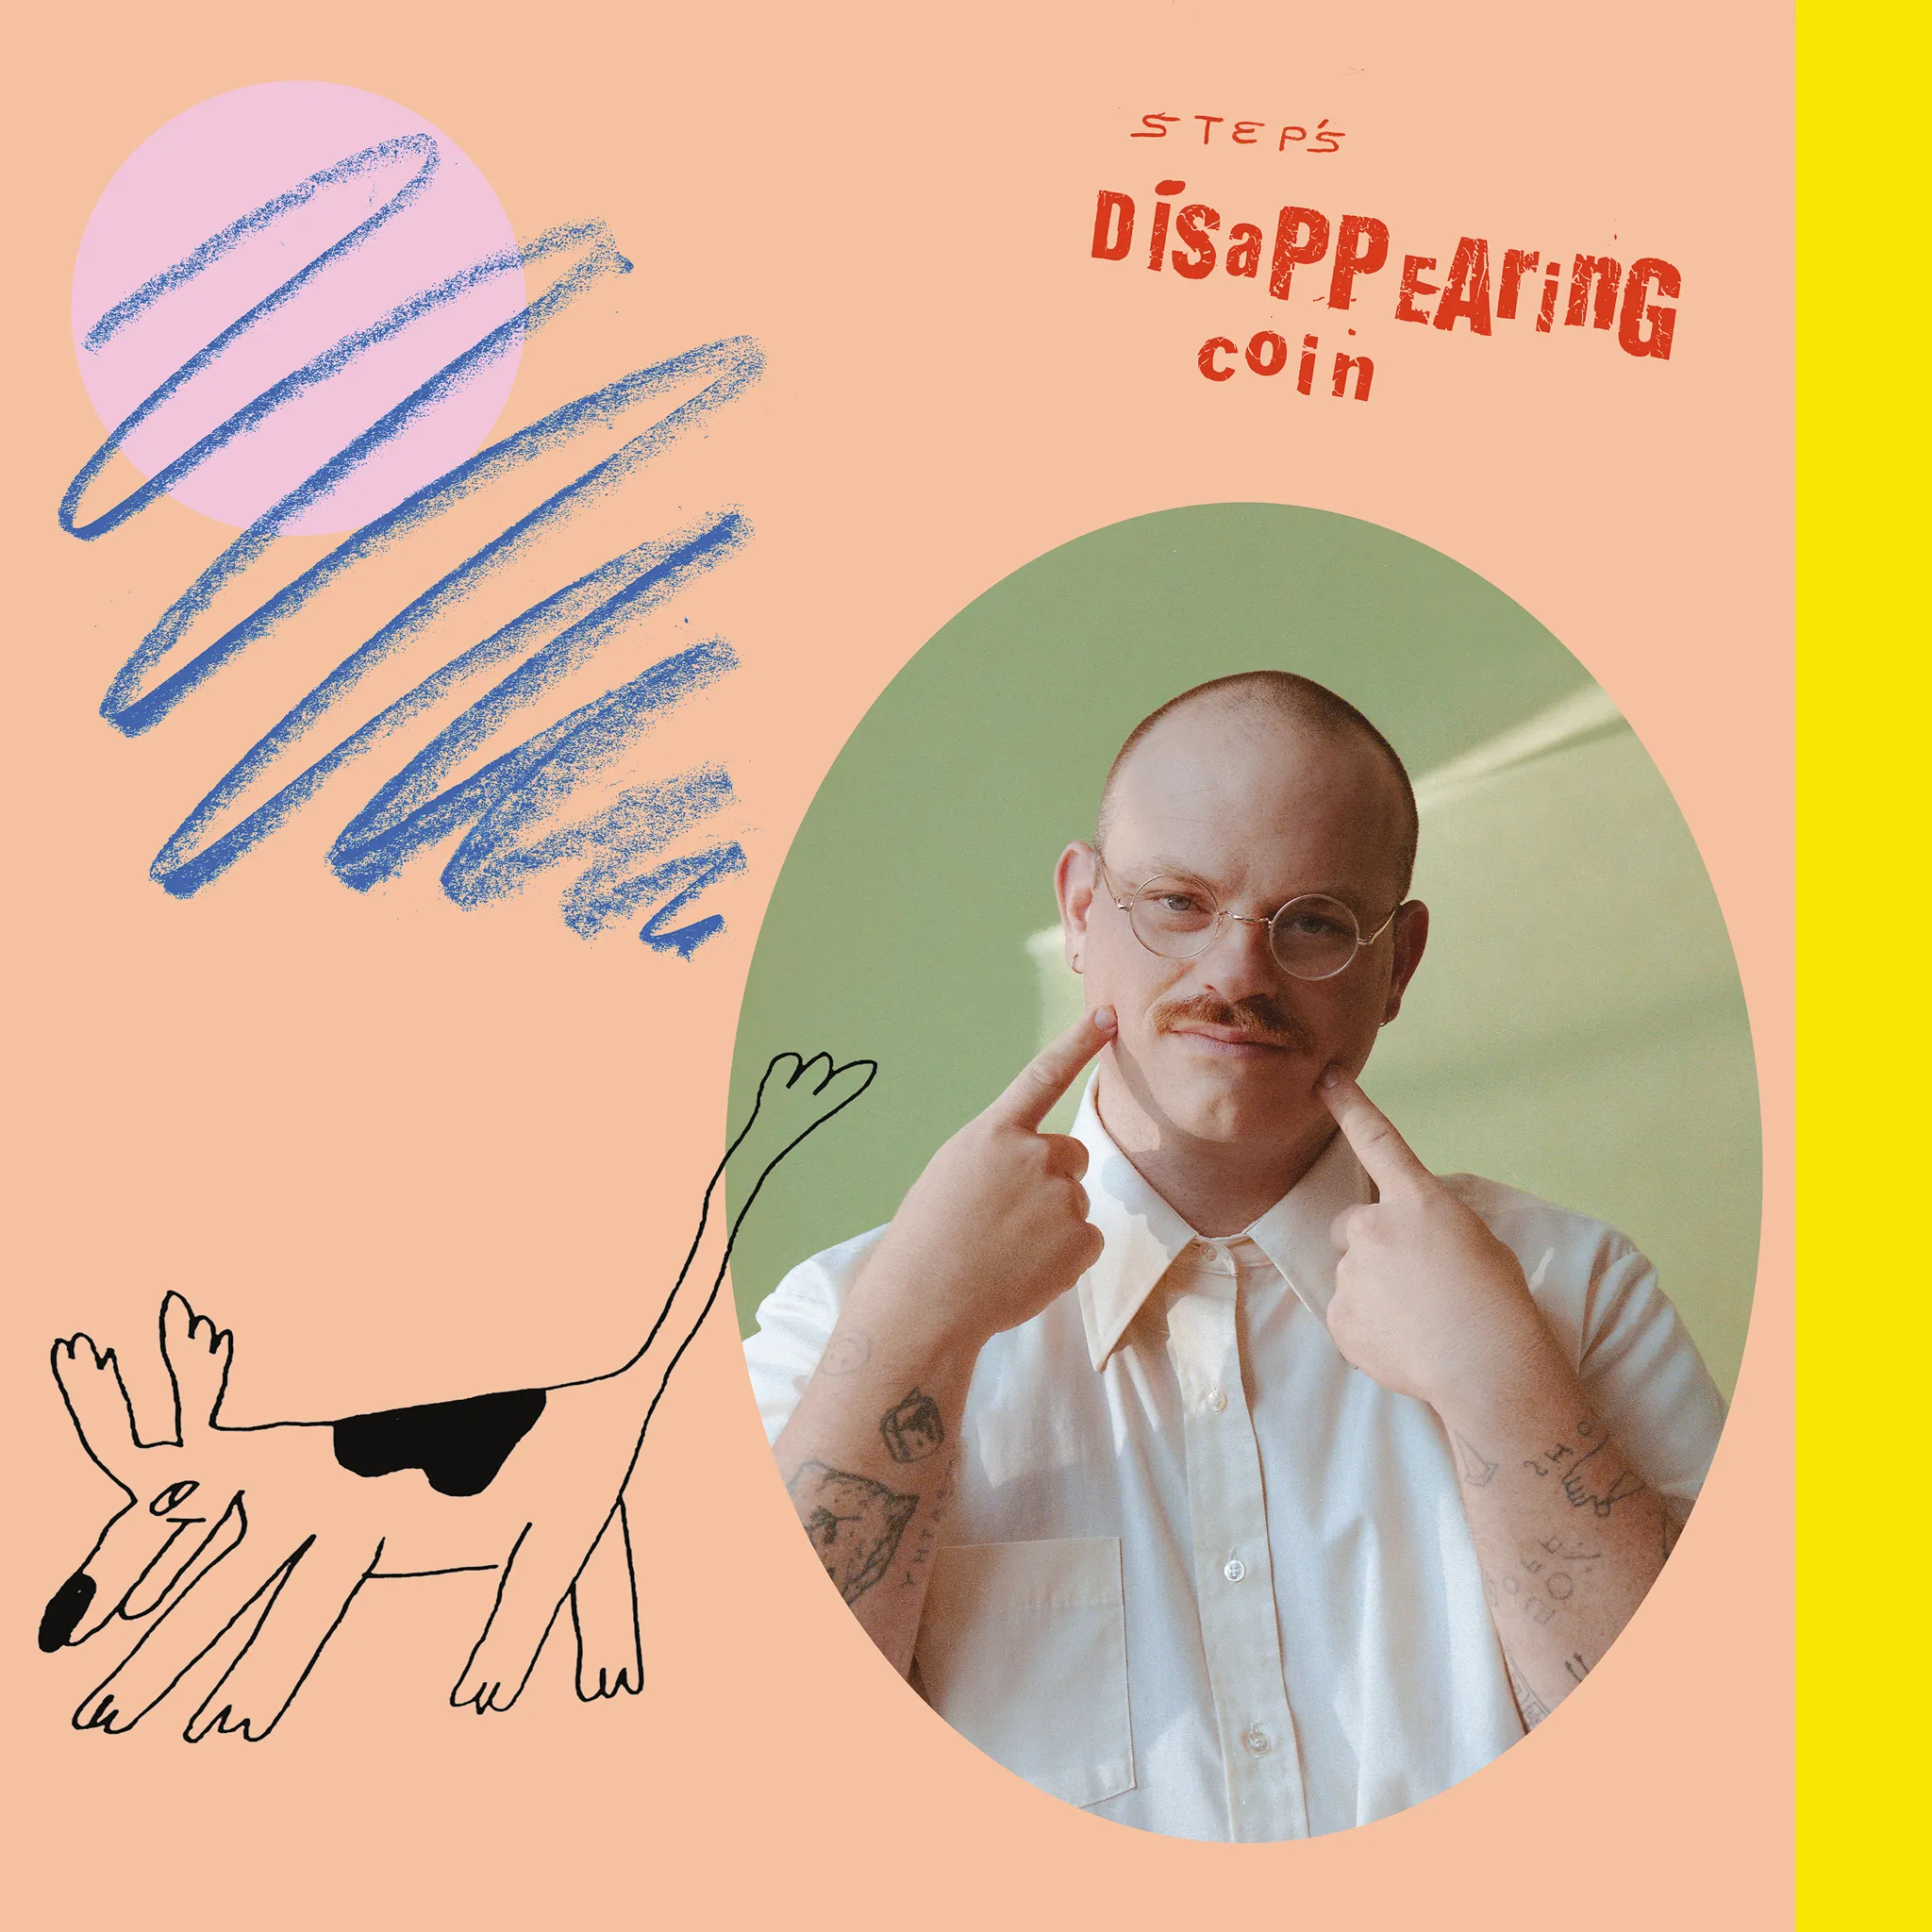 <strong>Stephen Steinbrink - Disappearing Coin</strong> (Vinyl LP - black)